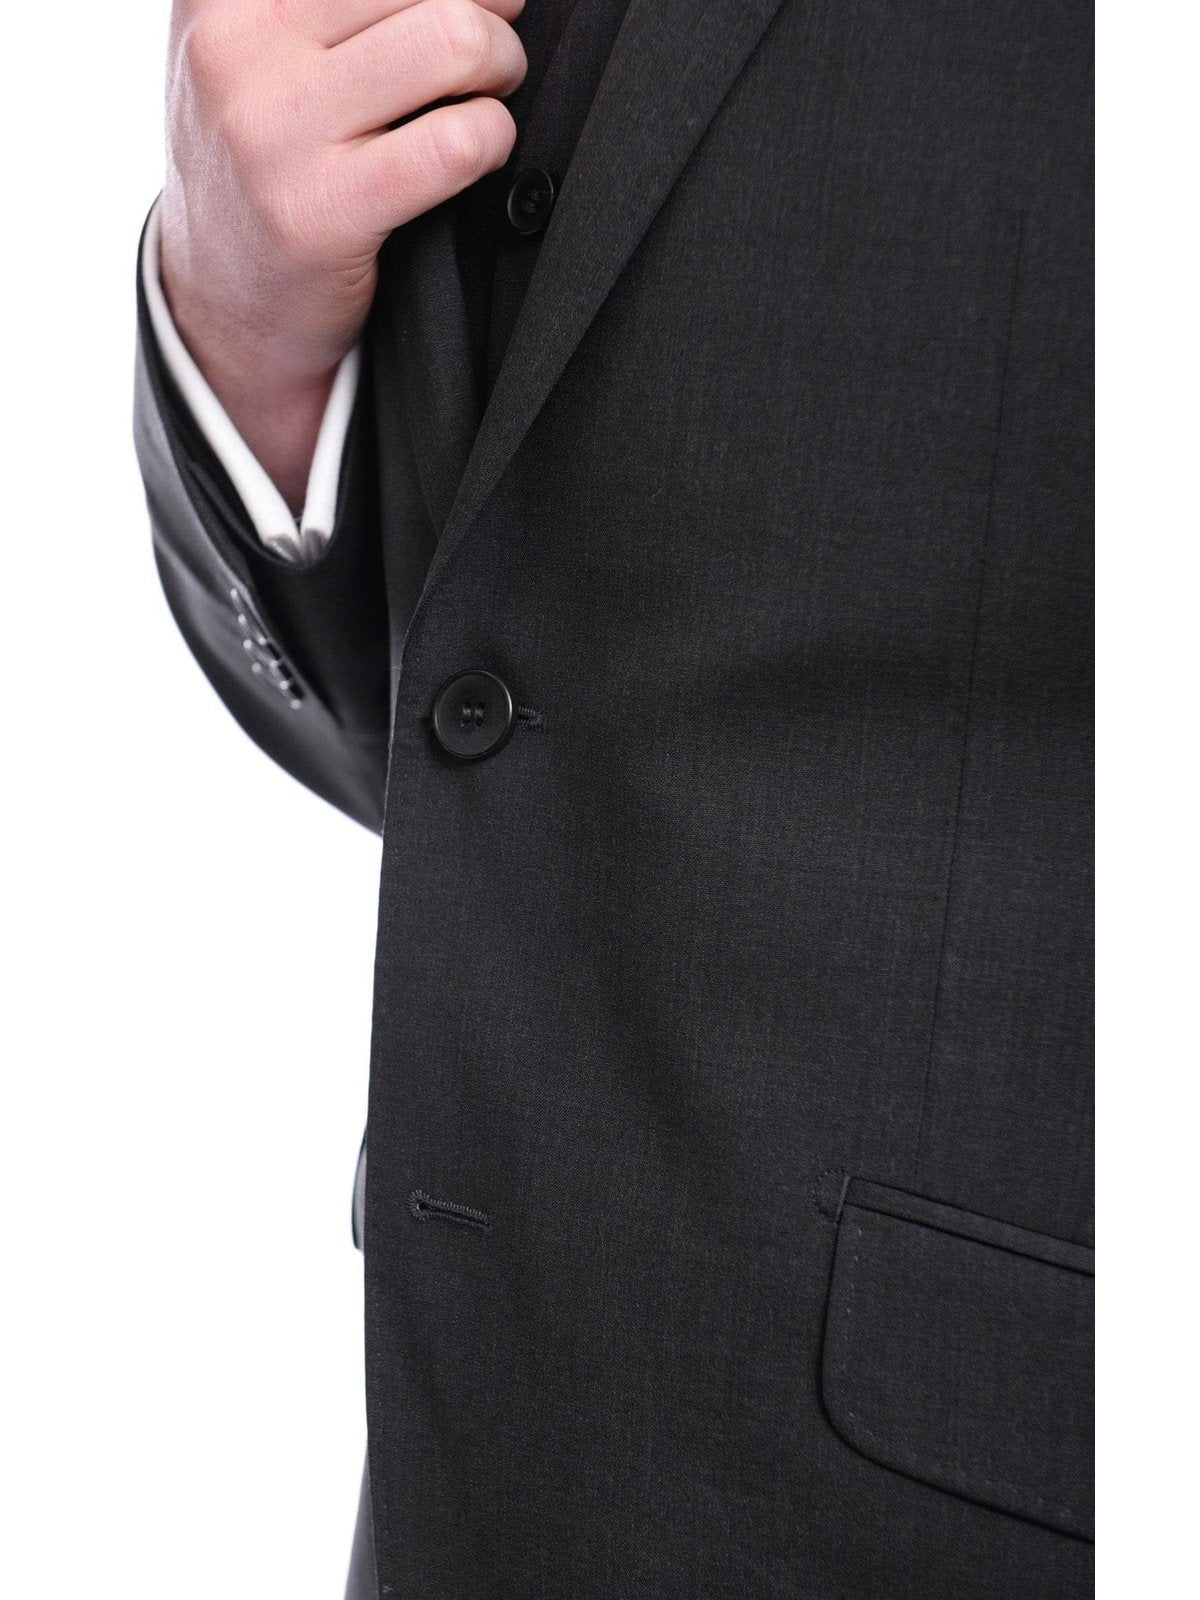 Napoli TWO PIECE SUITS Napoli Slim Fit Solid Charcoal Two Button Half Canvassed Marzotto Wool Suit